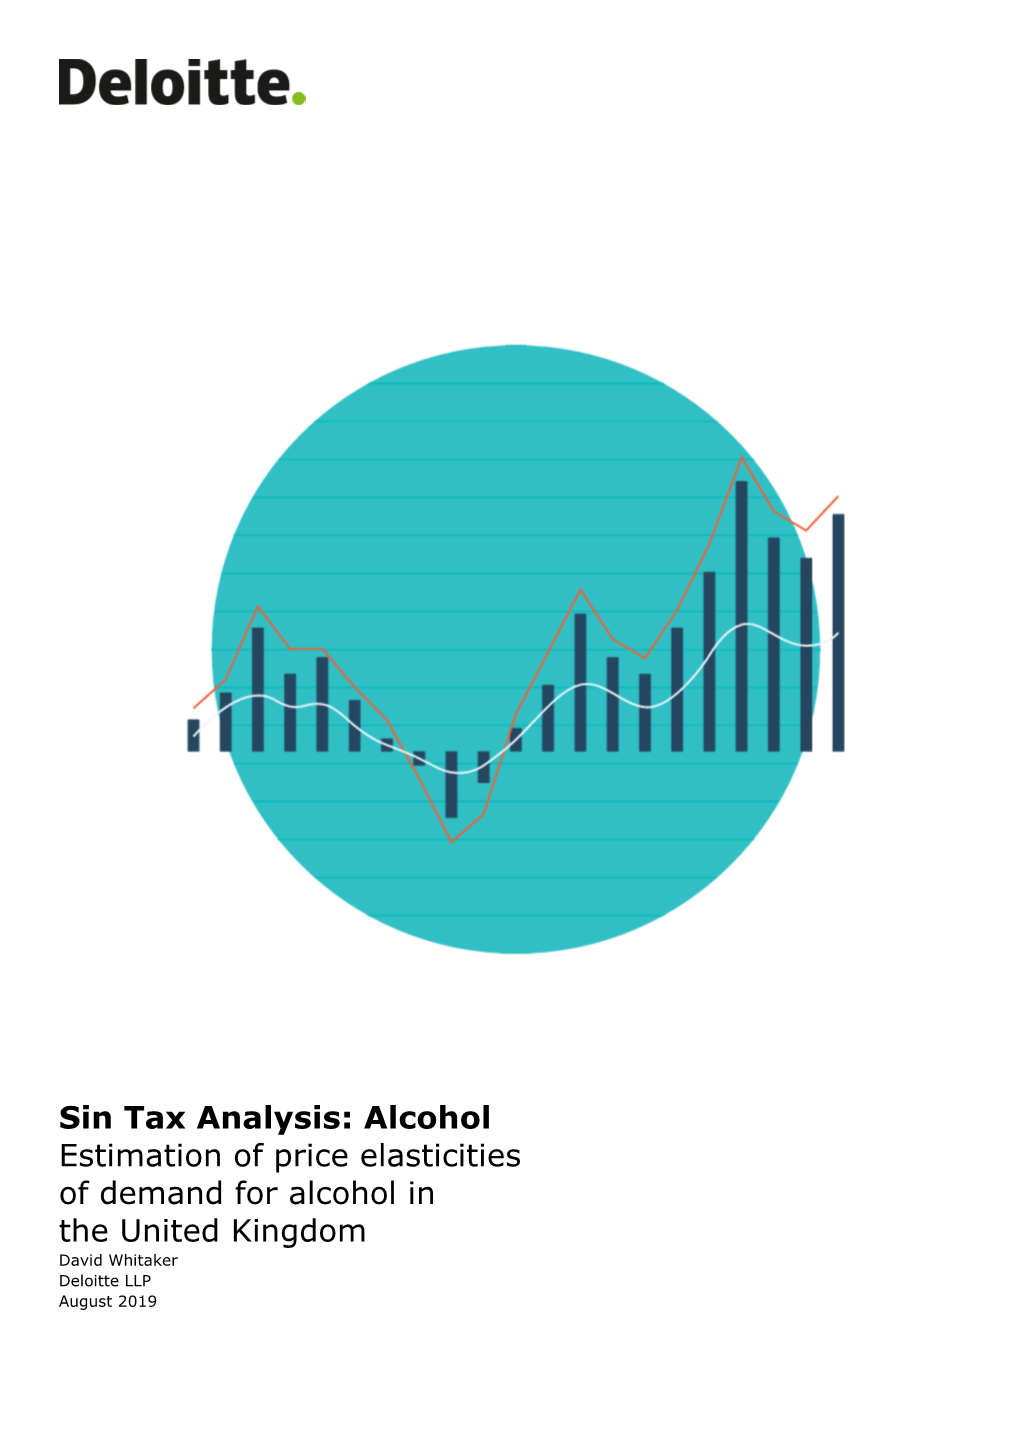 Alcohol Estimation of Price Elasticities of Demand for Alcohol in the United Kingdom David Whitaker Deloitte LLP August 2019